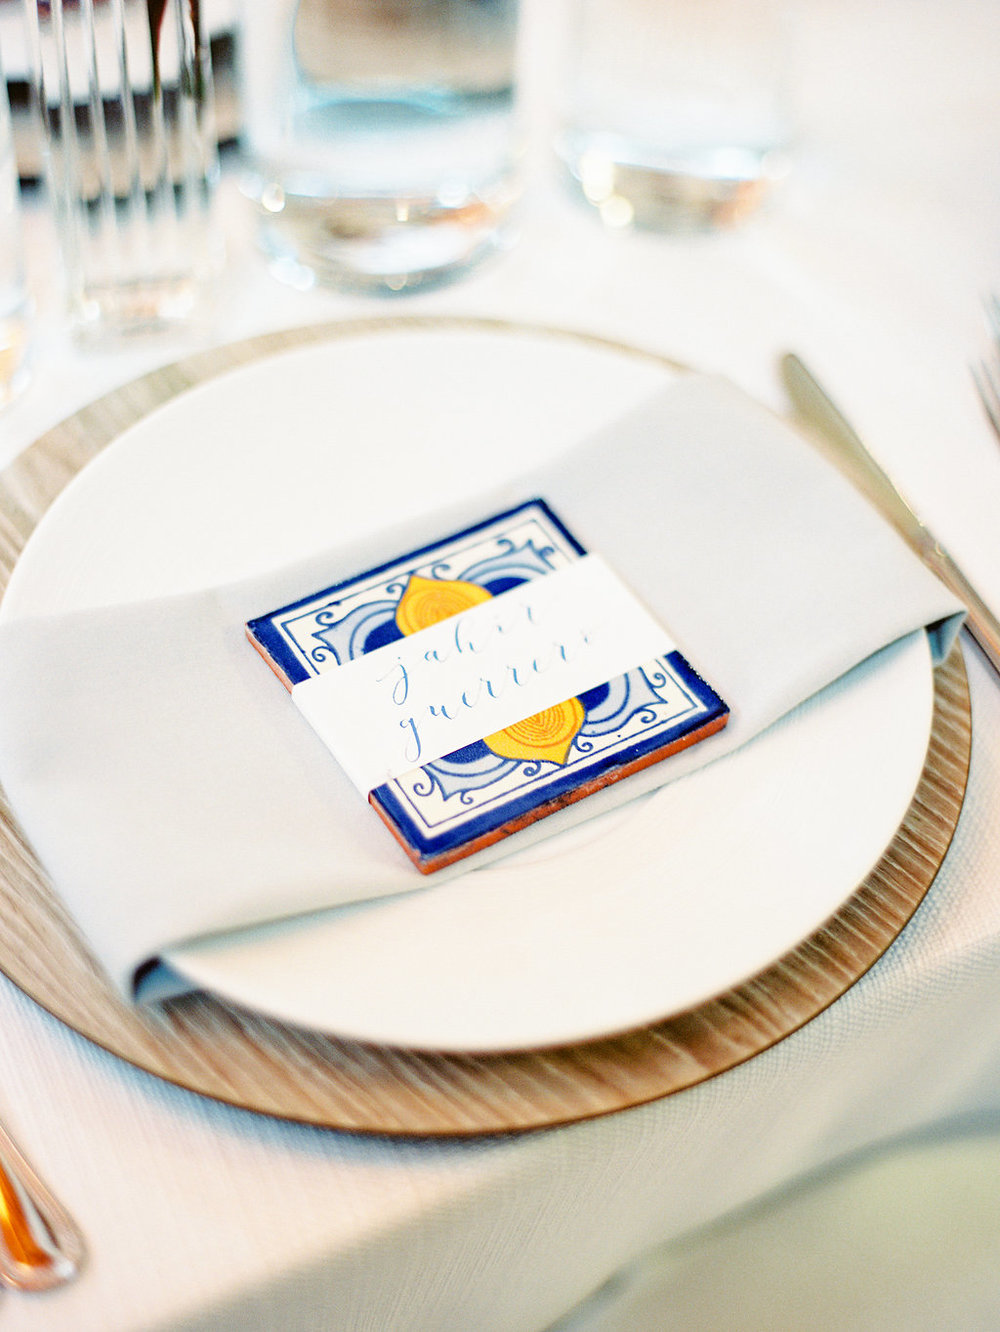 Wedding place setting with Spanish tile and calligraphy placecard